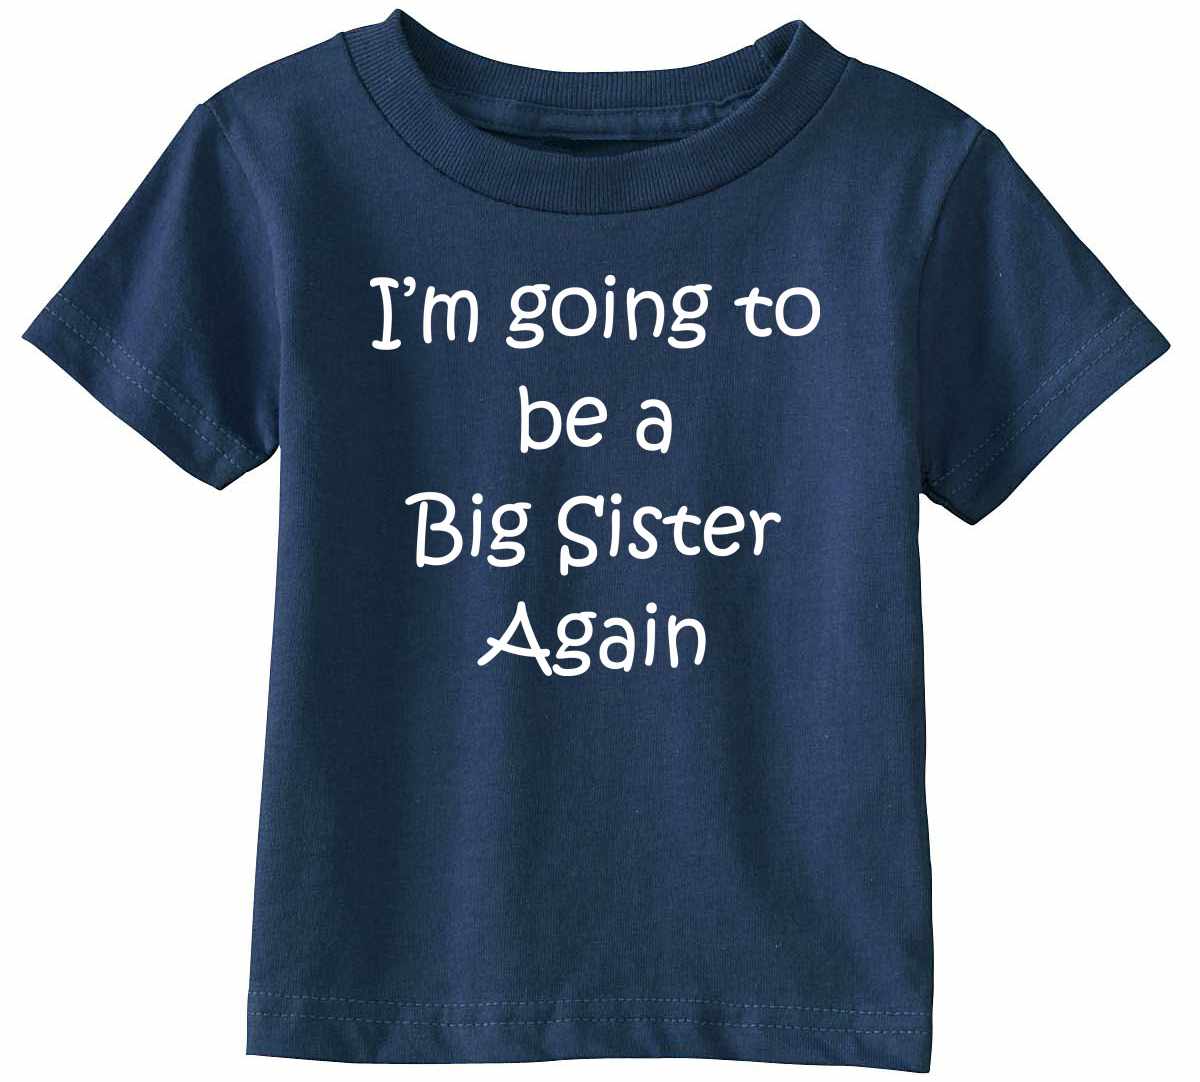 I'm Going to be a Big Sister Again Infant/Toddler  (#814-7)